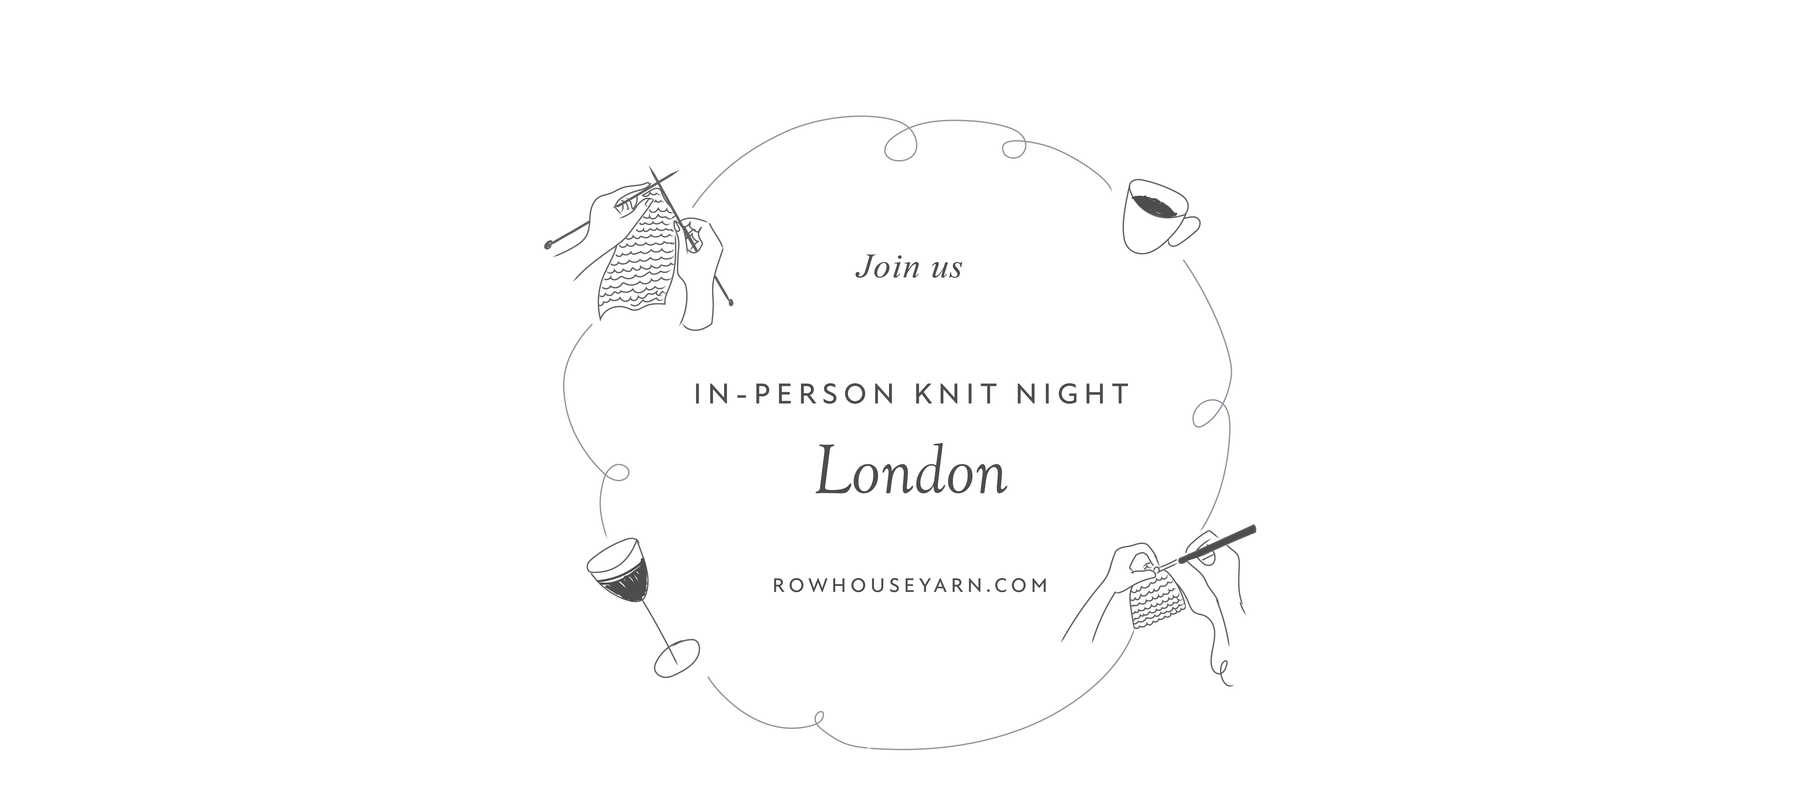 Join us for a Knit (or Crochet) Night in London on October 17th!